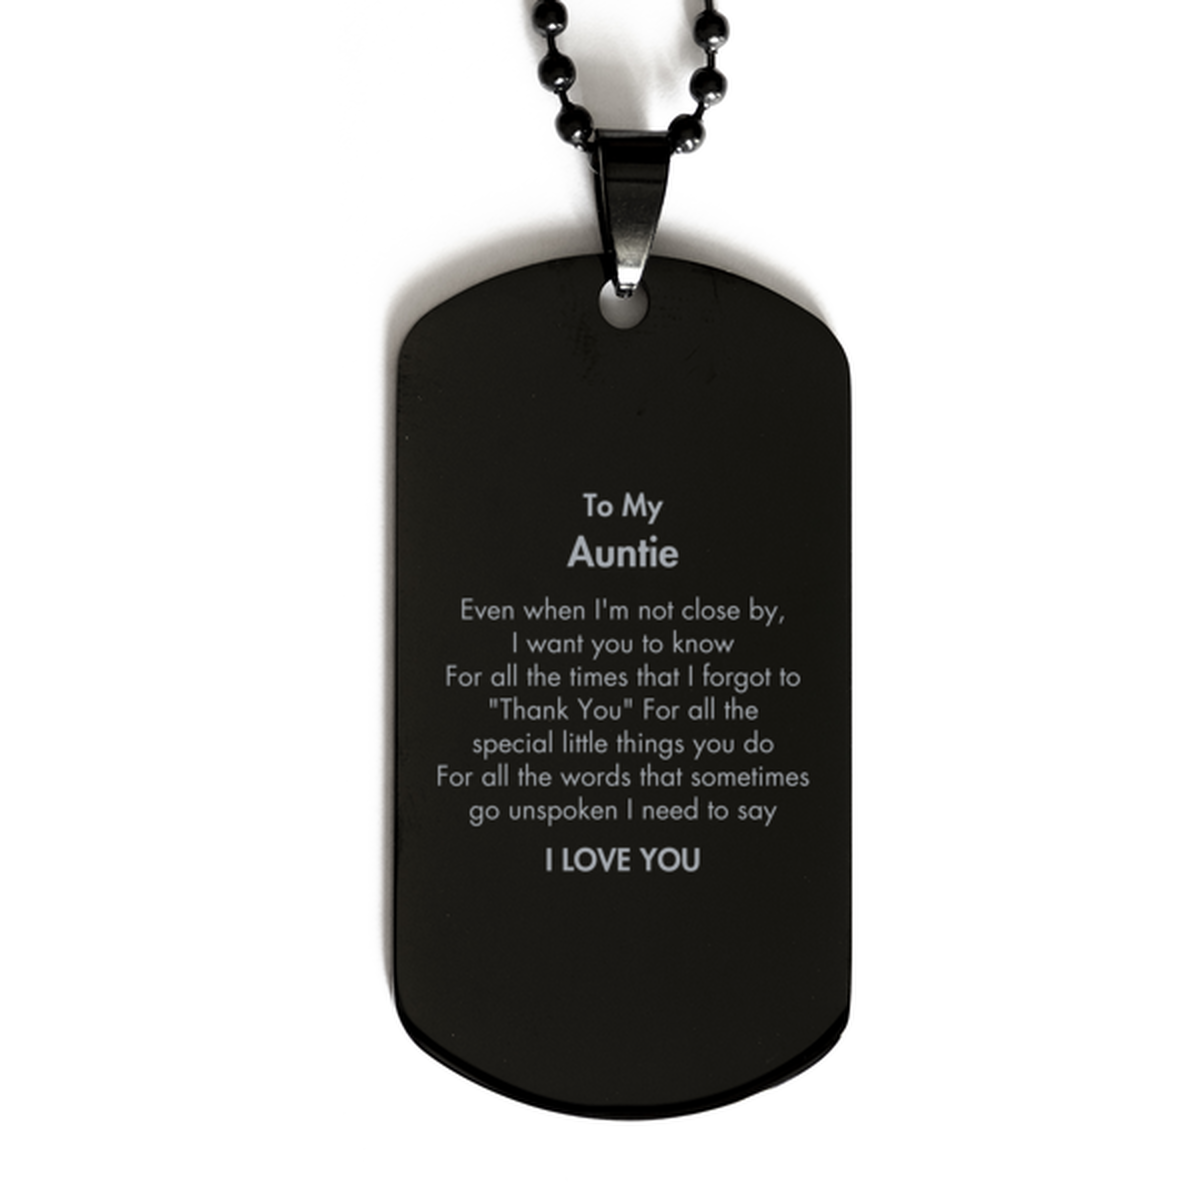 Thank You Gifts for Auntie, Keepsake Black Dog Tag Gifts for Auntie Birthday Mother's day Father's Day Auntie For all the words That sometimes go unspoken I need to say I LOVE YOU